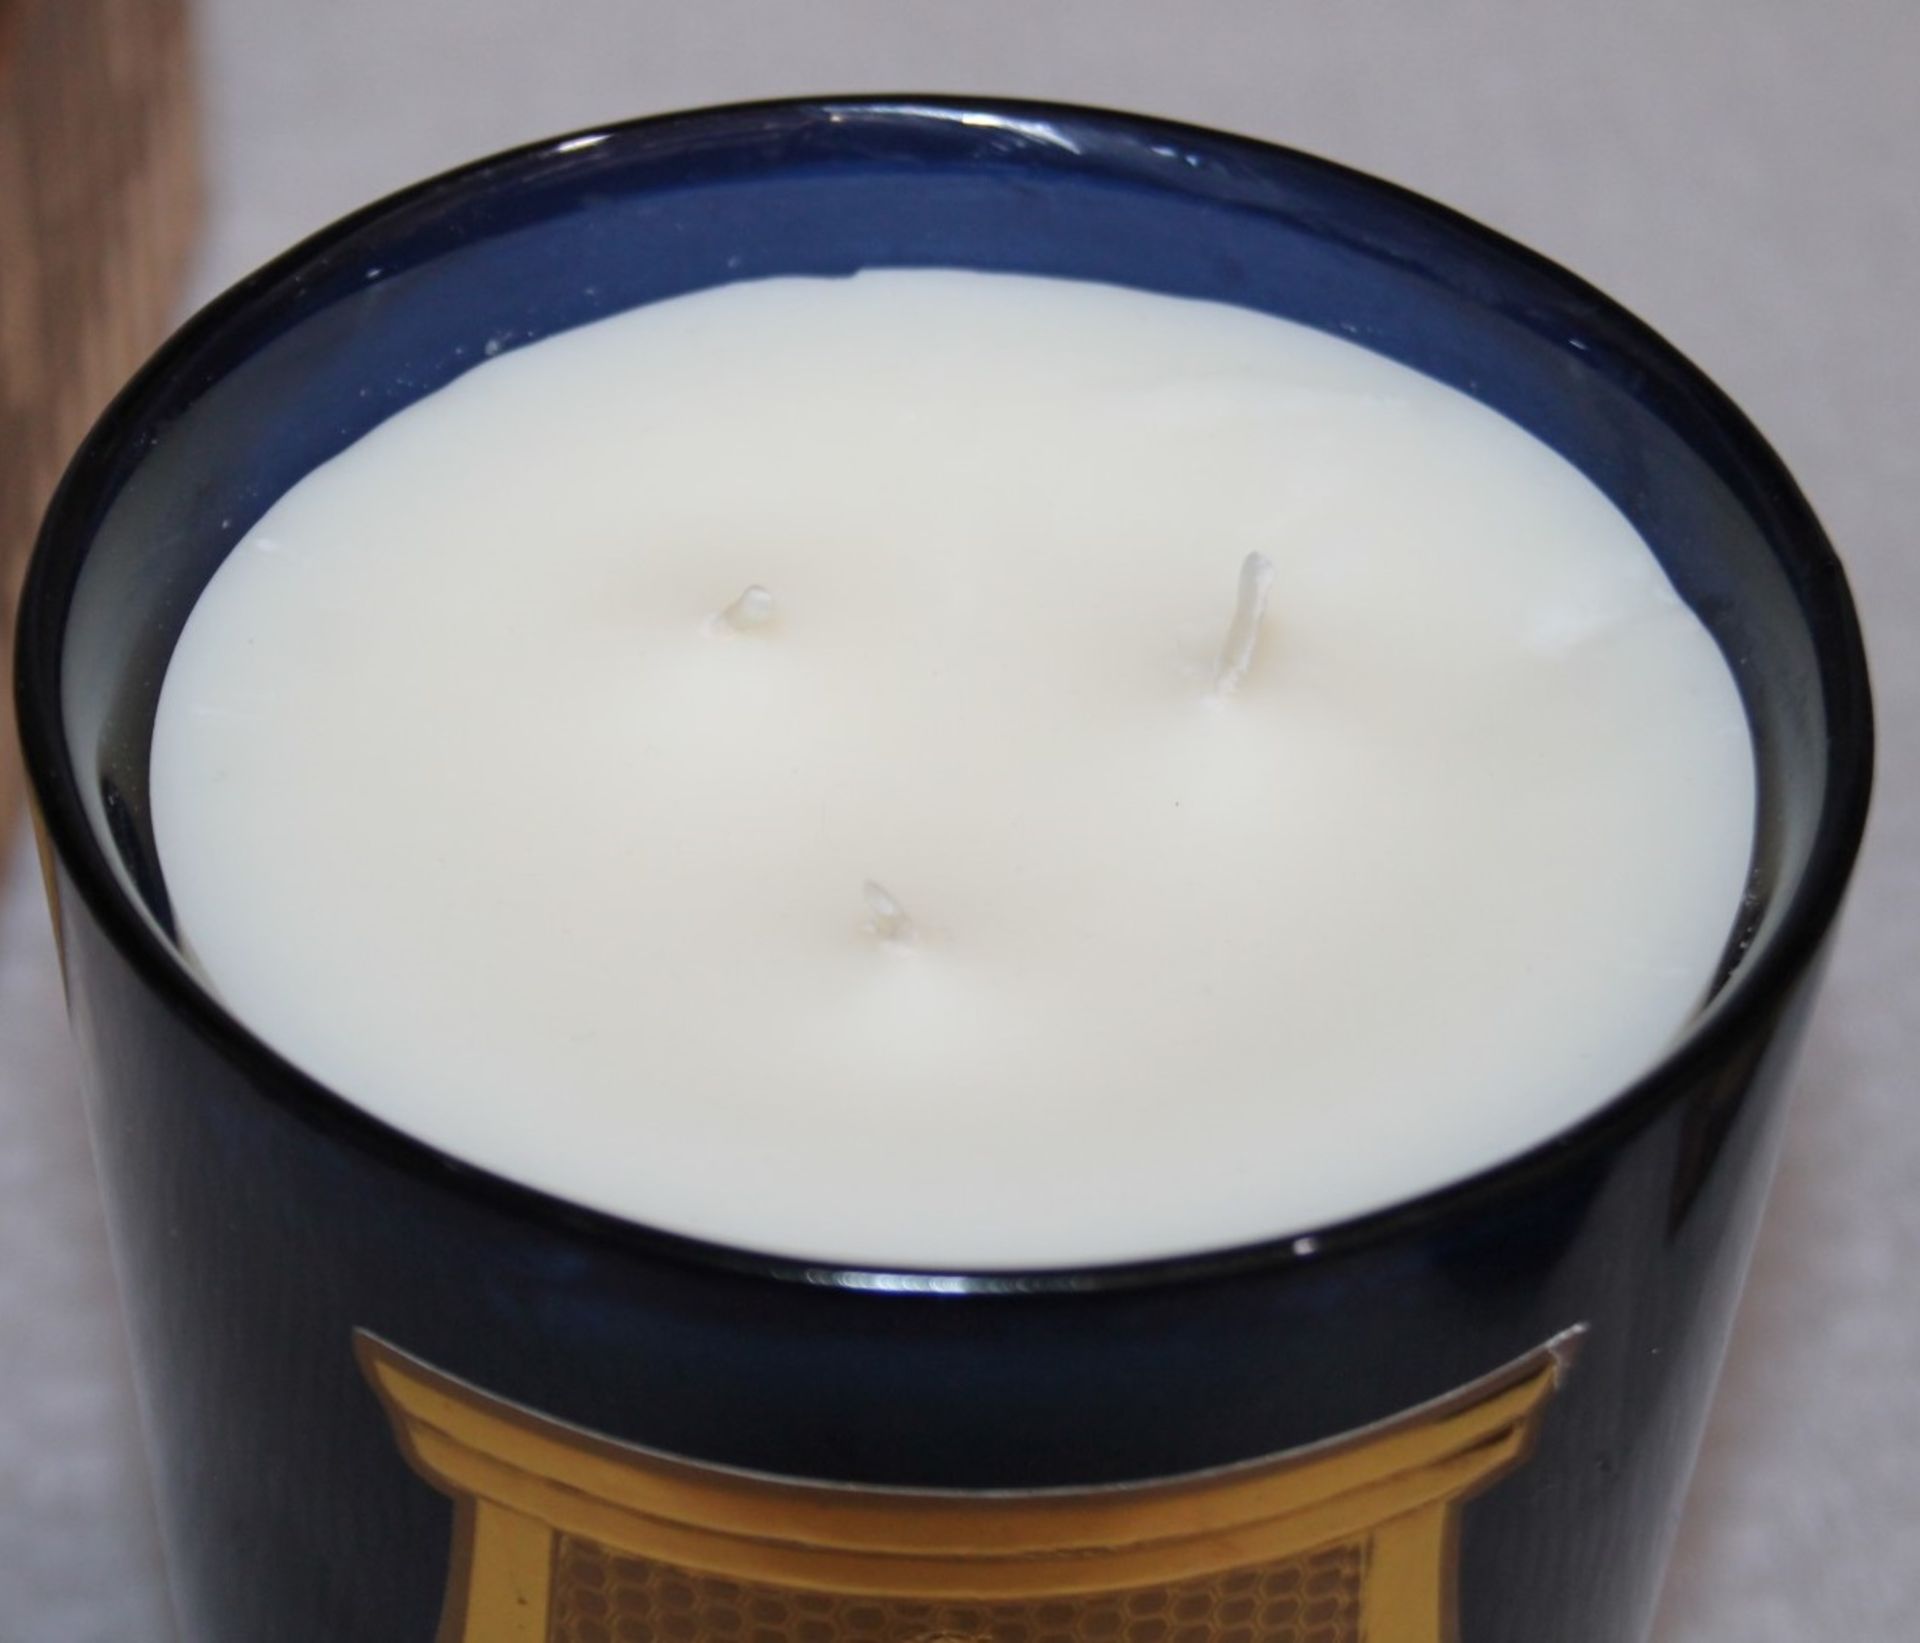 1 x TRUDON Les Belles Matières Reggio Scented Candle (800g) - Made in France - Original Price £230 - Image 6 of 9